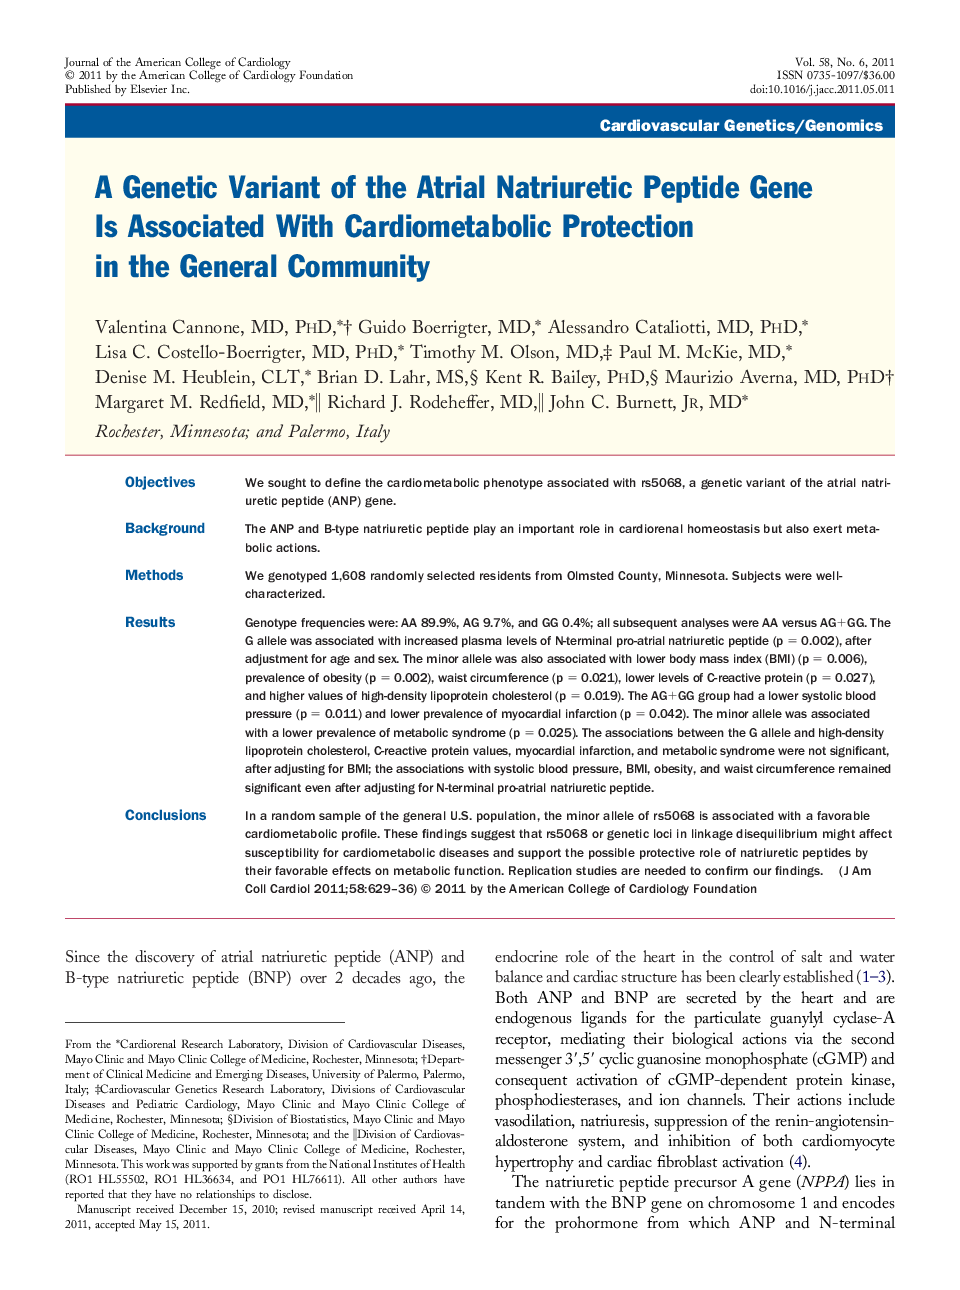 A Genetic Variant of the Atrial Natriuretic Peptide Gene Is Associated With Cardiometabolic Protection in the General Community 